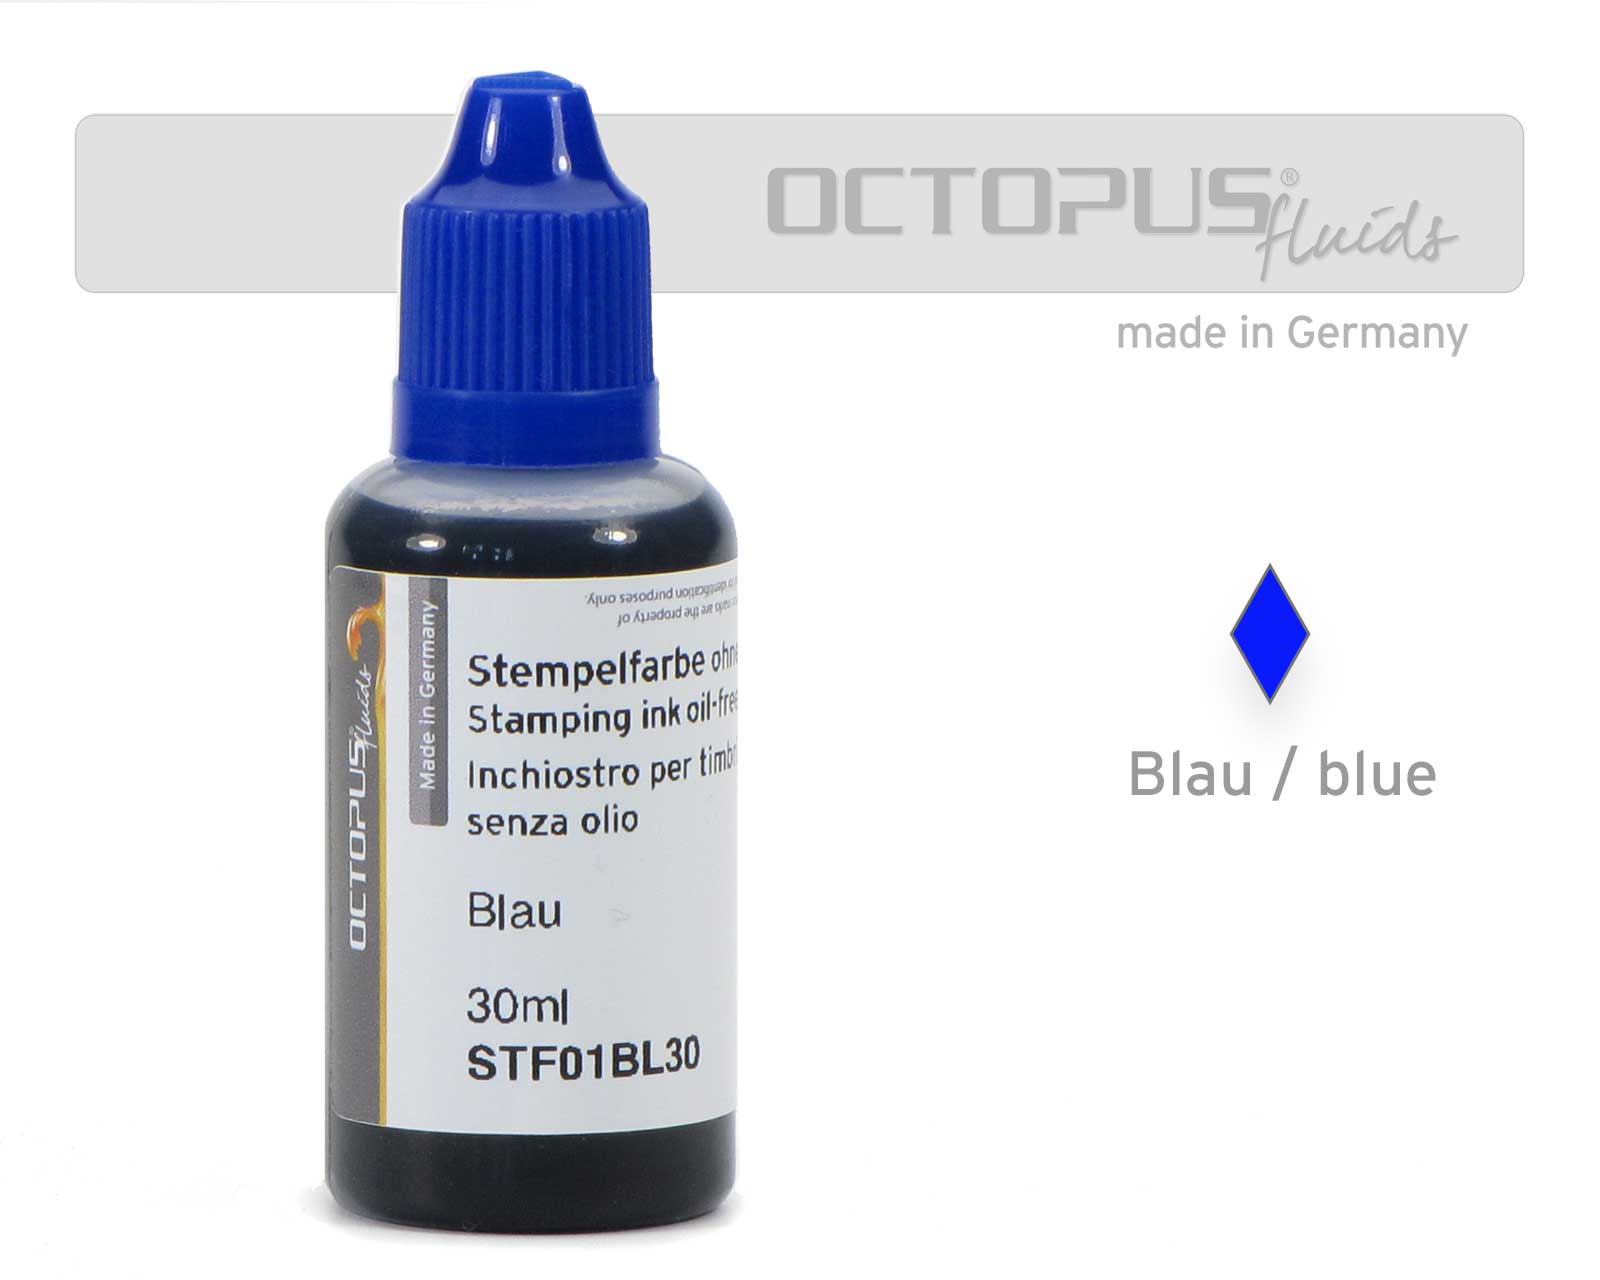 Stamping ink for ink pads and self-inking stamps, oil-free, blue